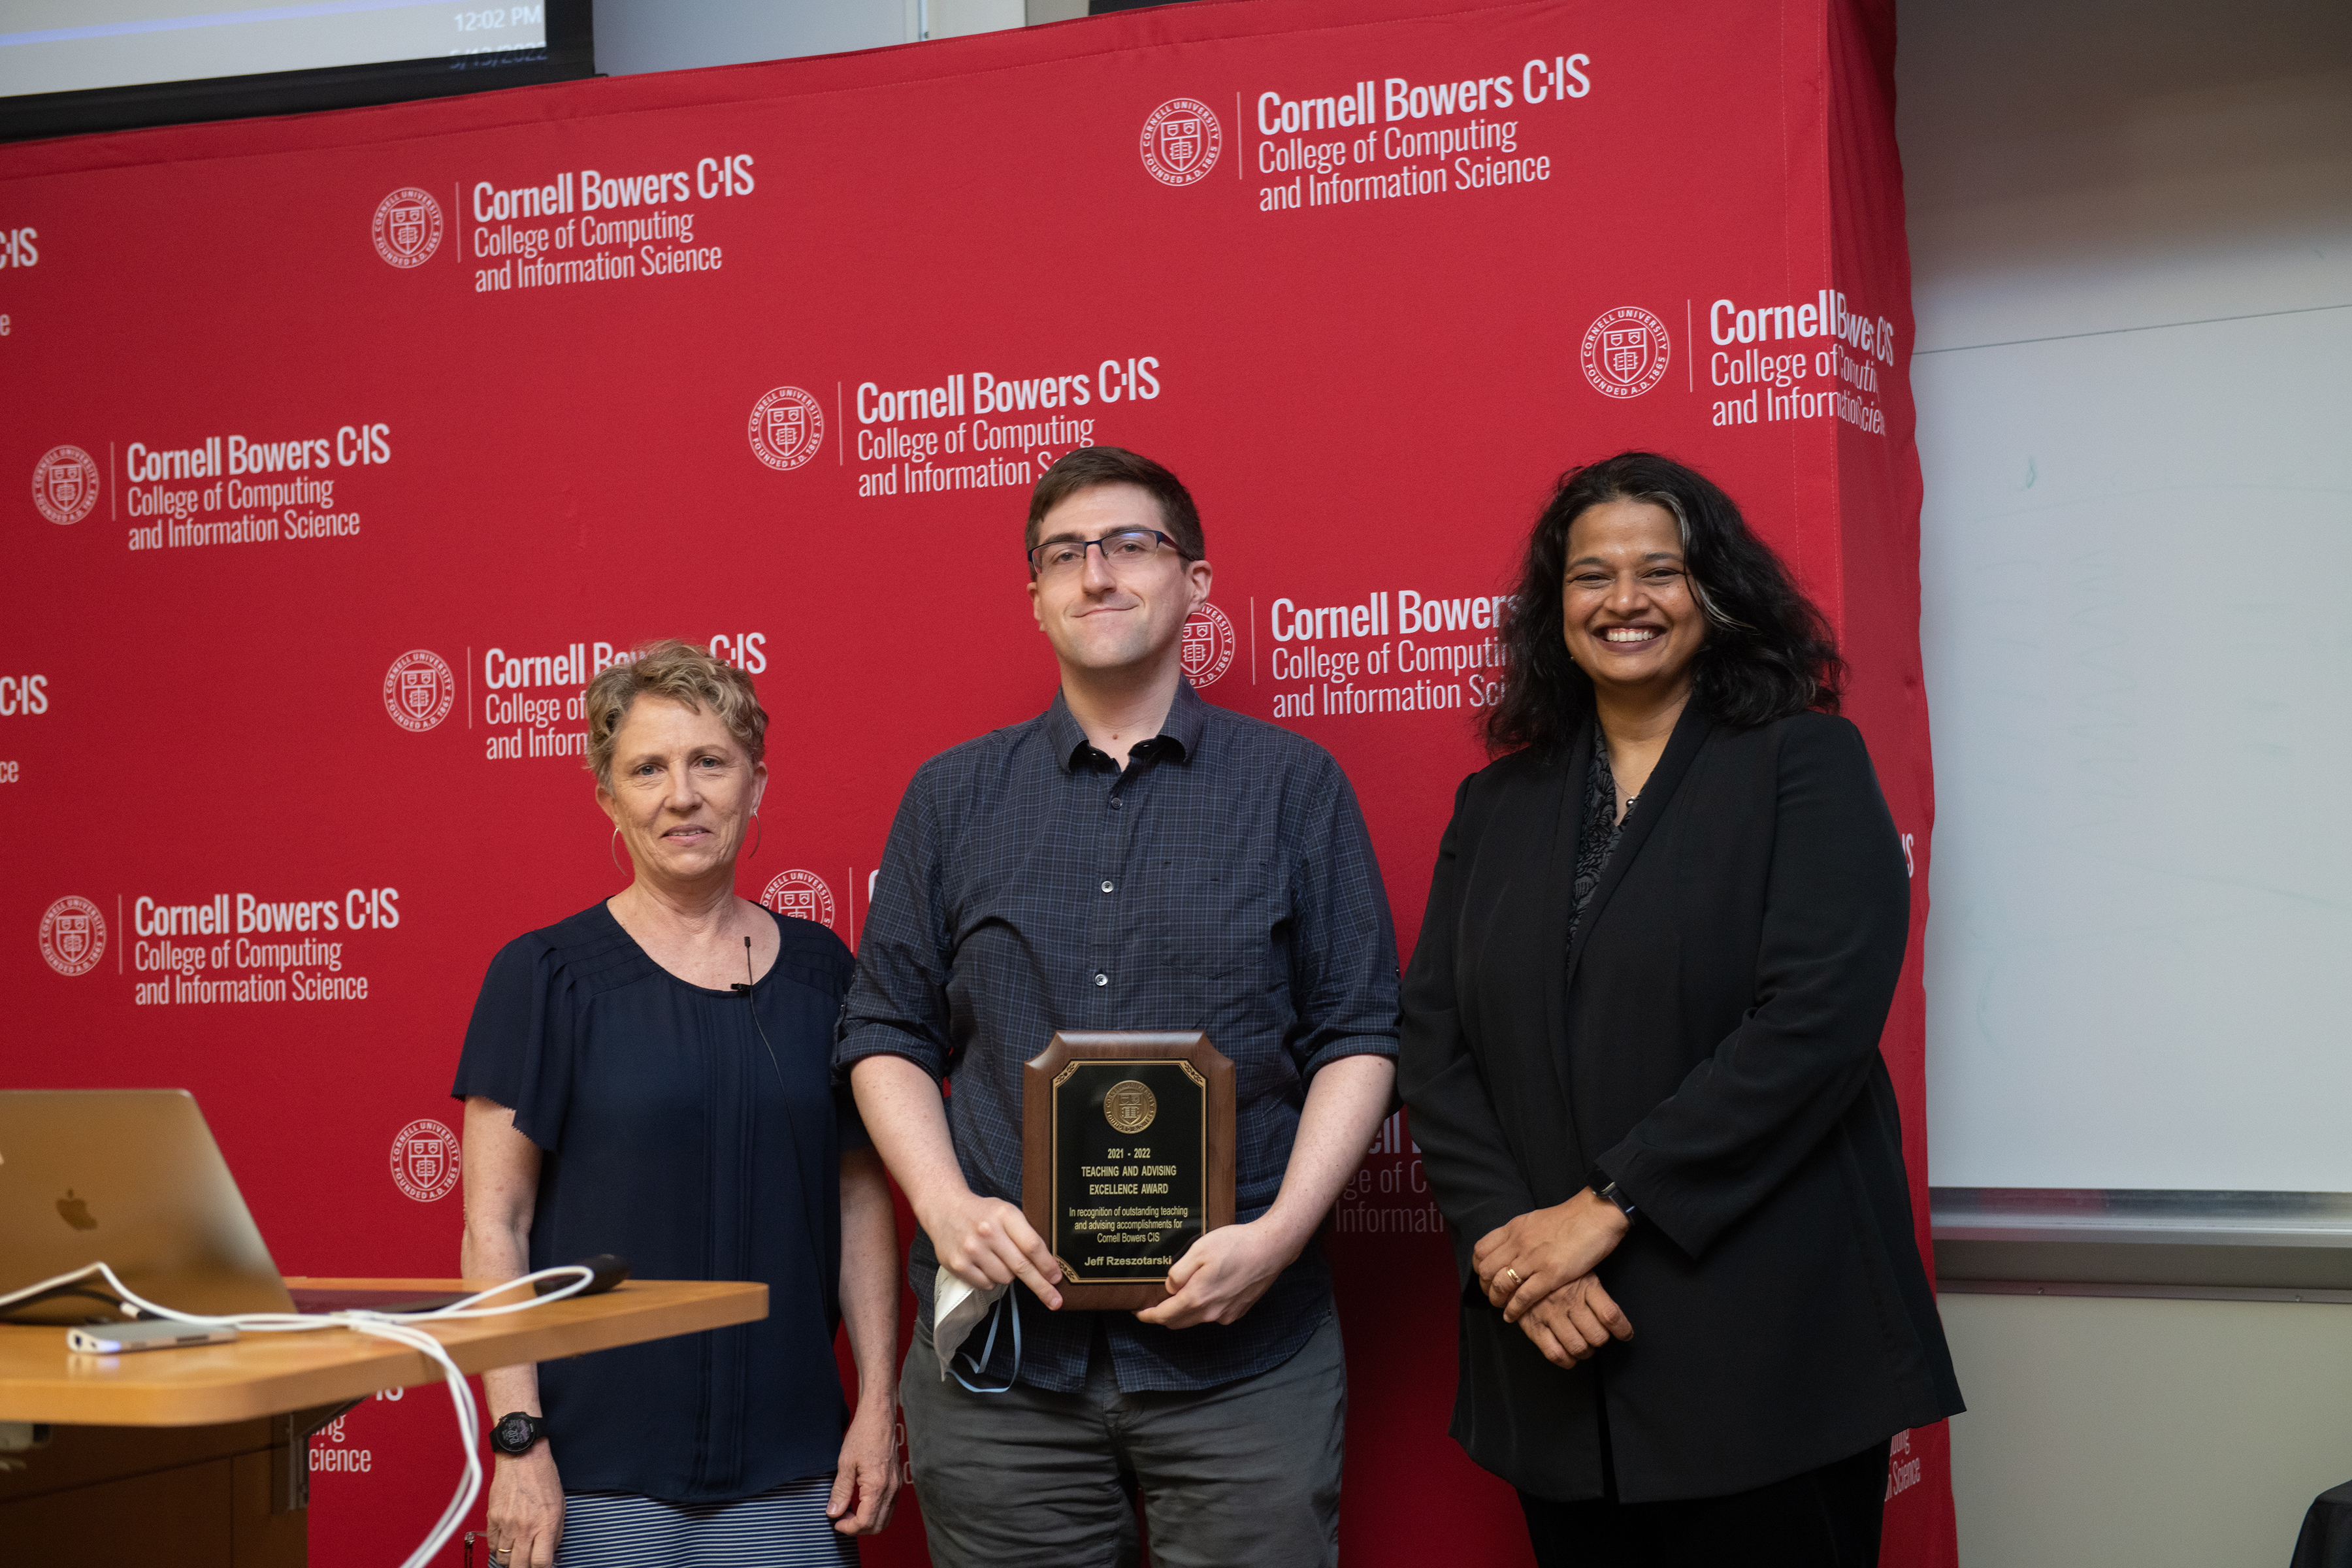 Jeff Rzeszotarski, assistant professor of information science, receives the Teaching and Advising Excellence award during a reception held May 13, 2022.